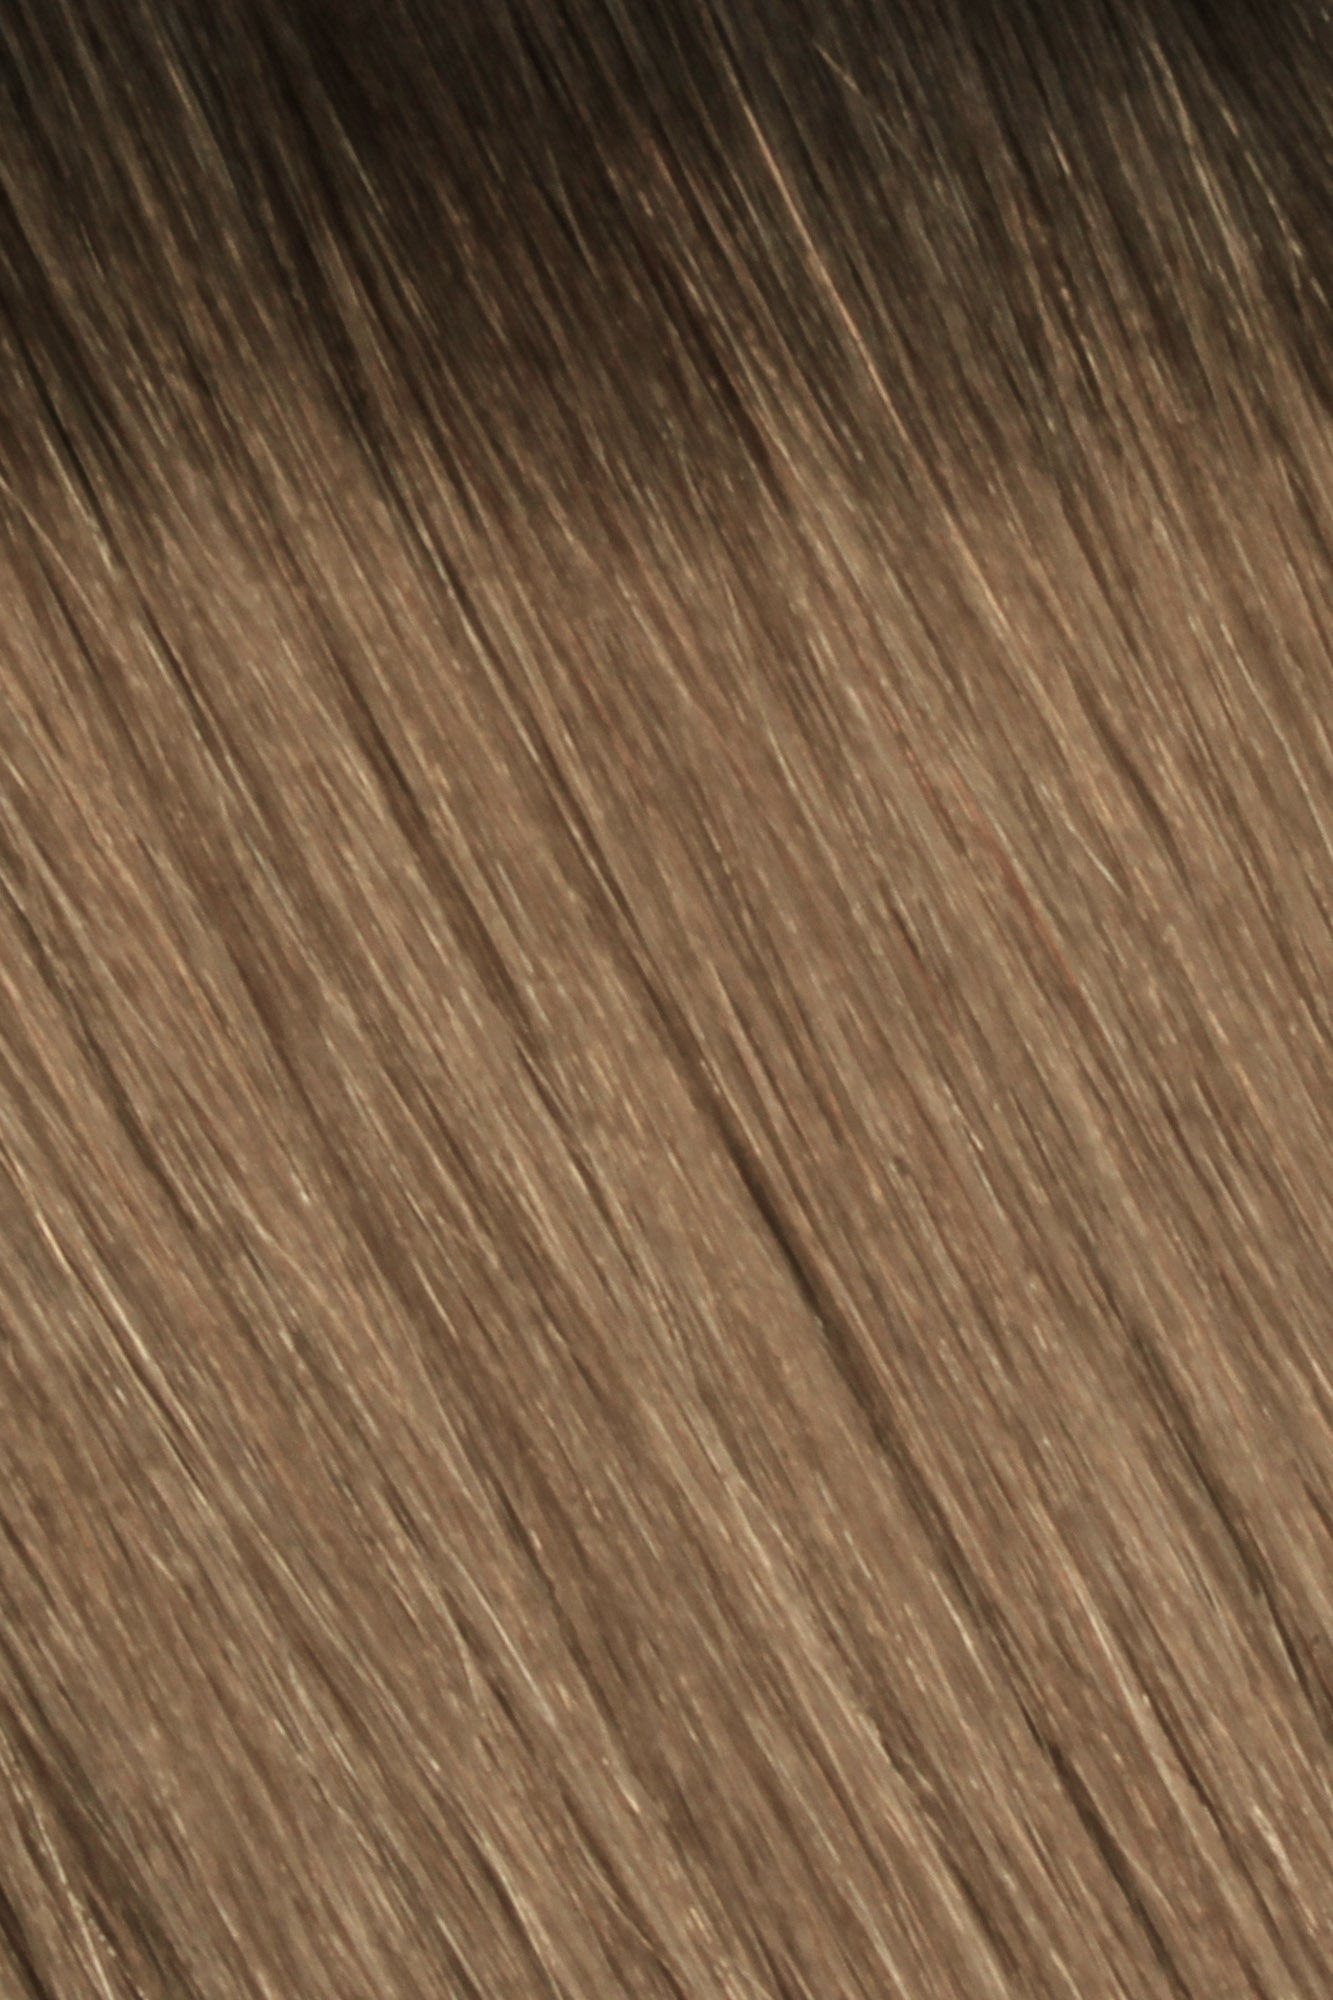 SEAMLESS® Flat Weft 24 Inches - SWAY Hair Extensions Rooted-Sunkissed-Brown-R2-8-10 Natural SEAMLESS® Flat Weft 24 Inches extensions. Thin, flexible, and discreet. 100% Double Drawn Remy Human Hair. Versatile and reusable